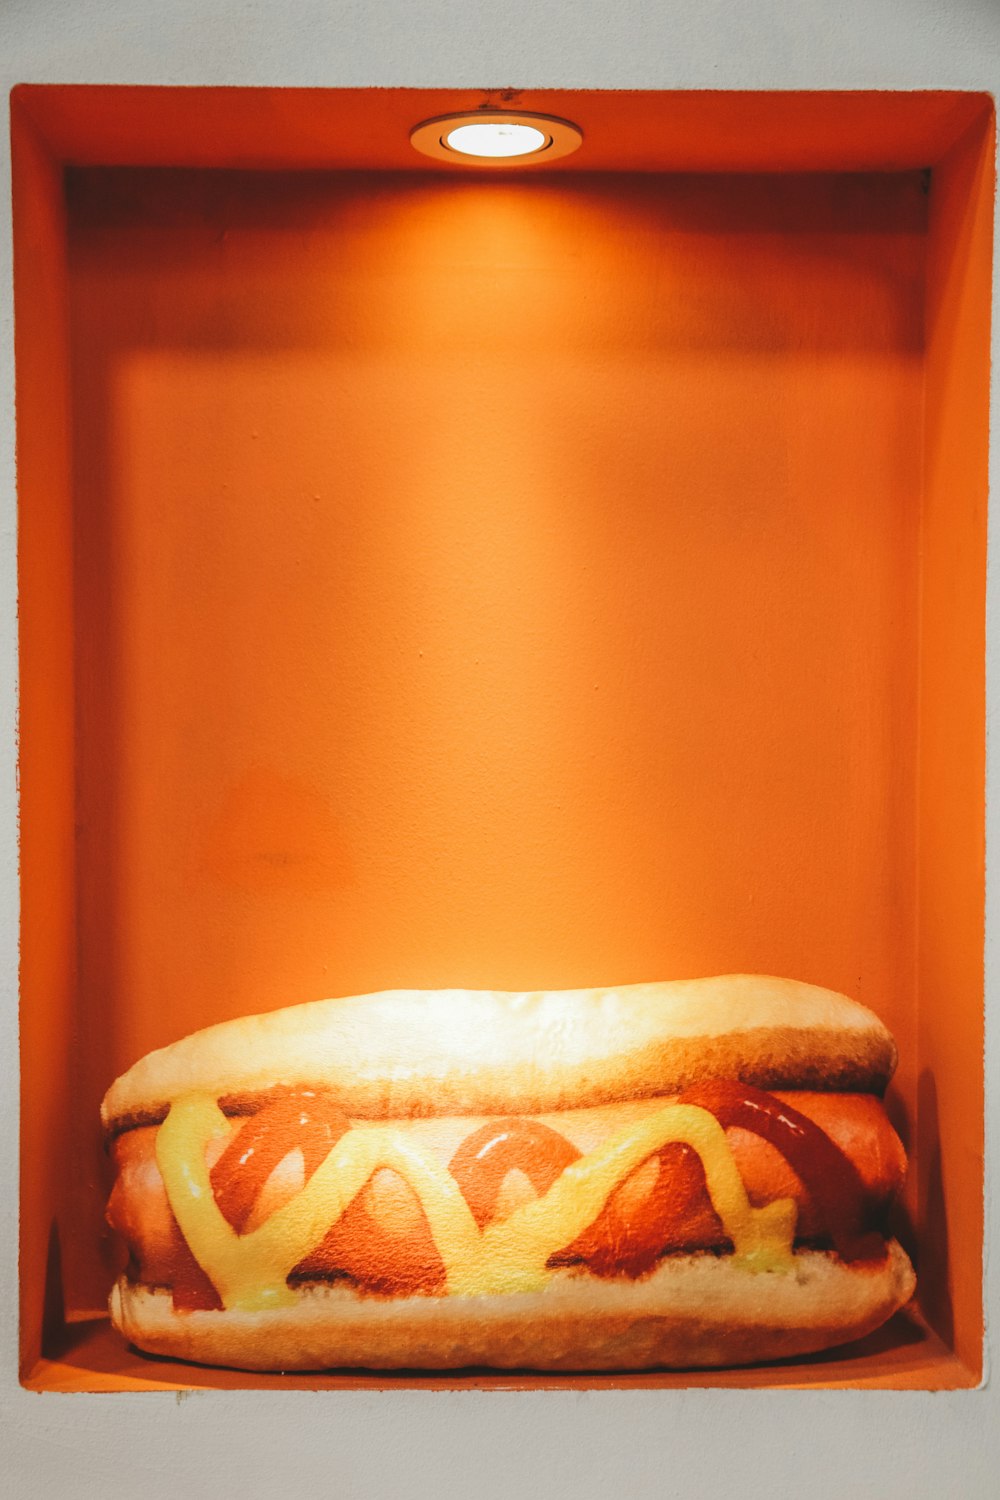 hotdog in bun with ketchup and mustard inside lighted box